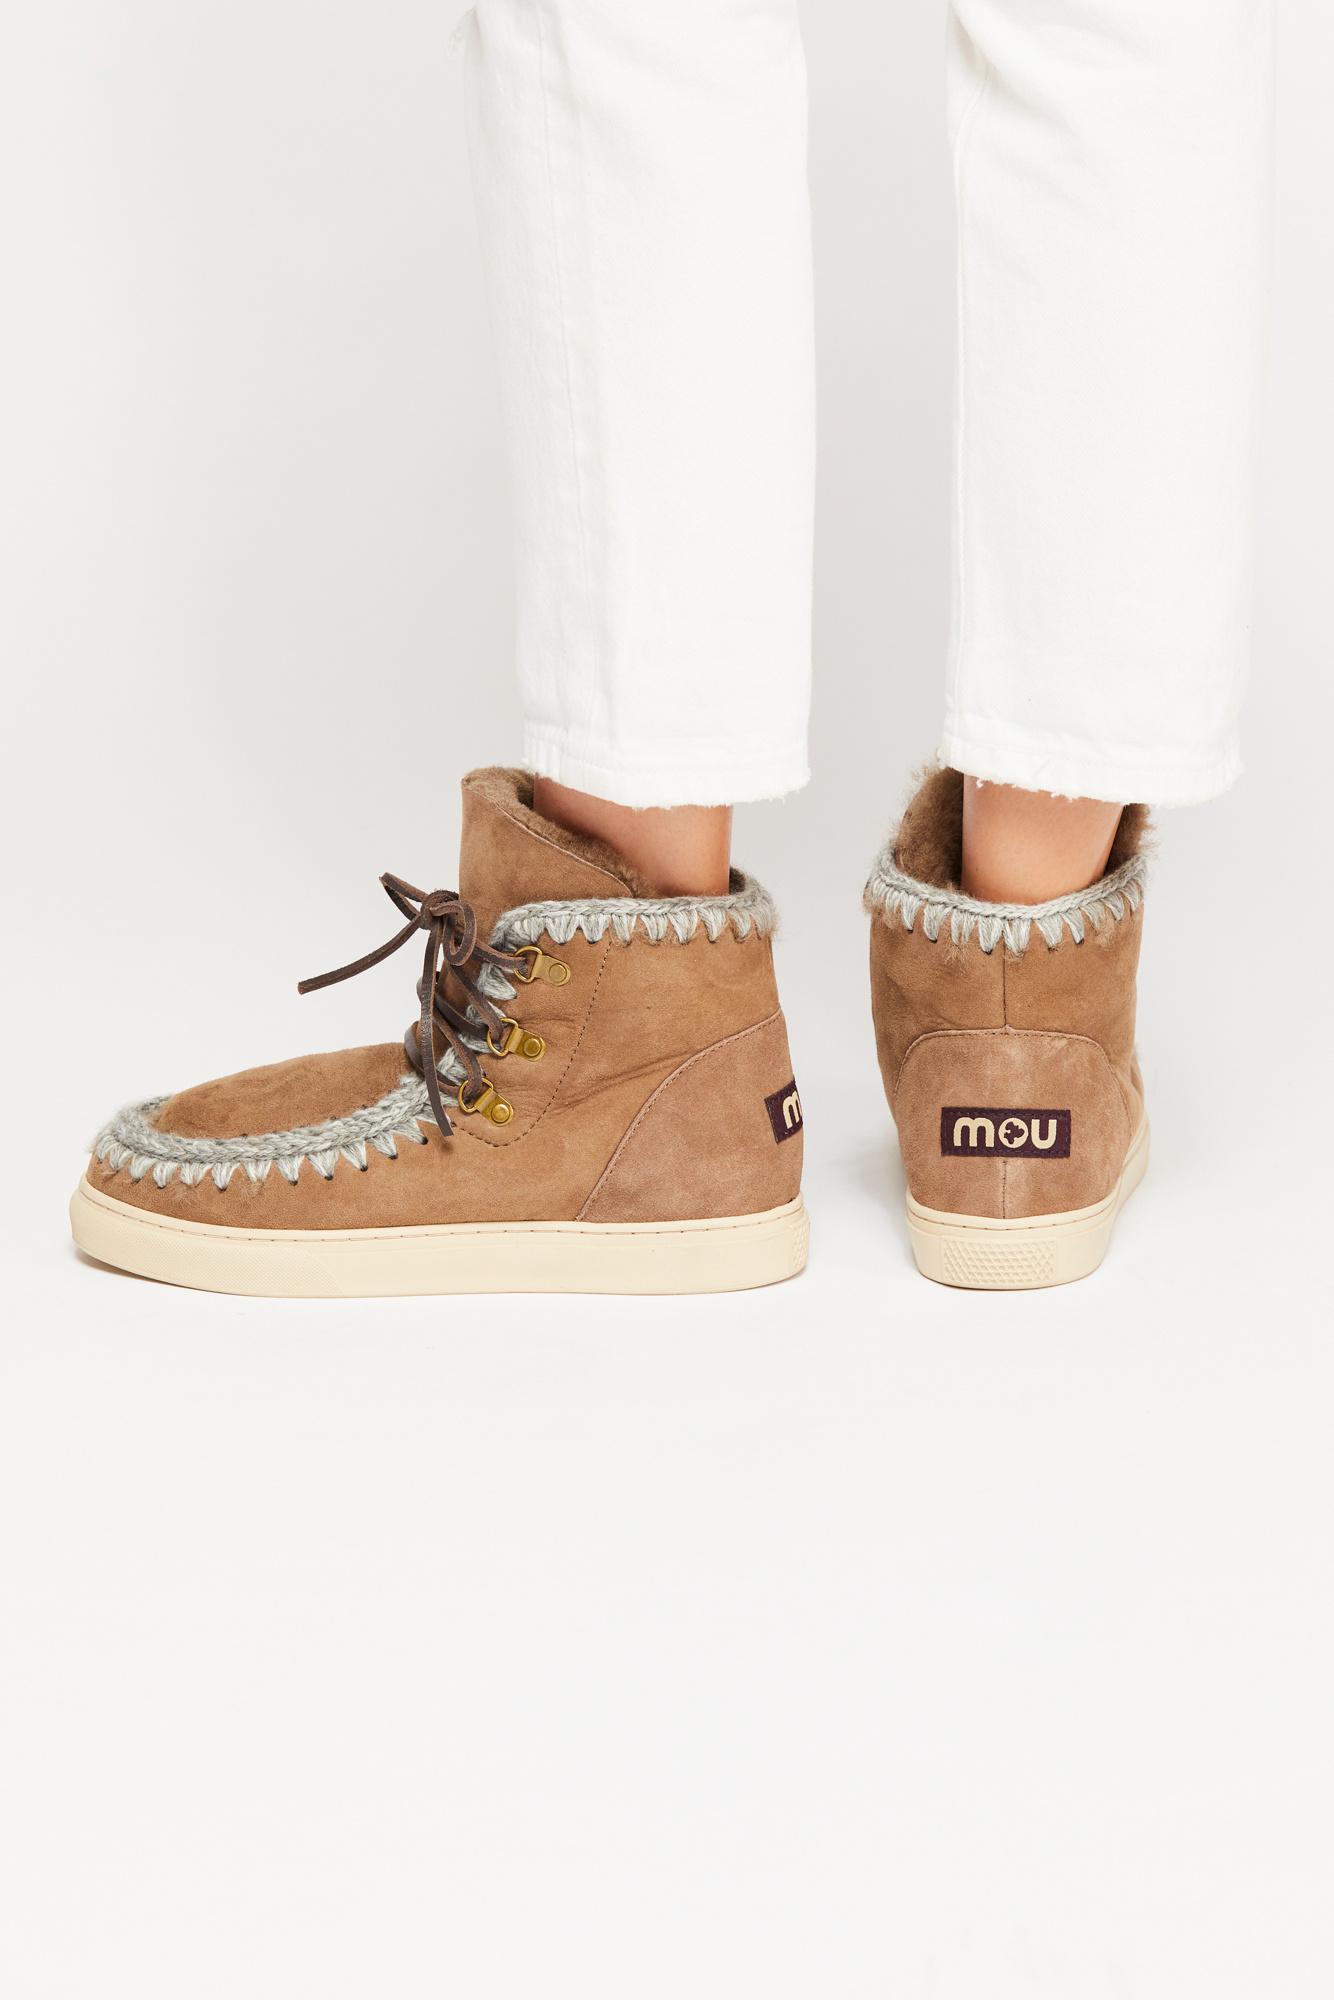 mou sneaker lace up